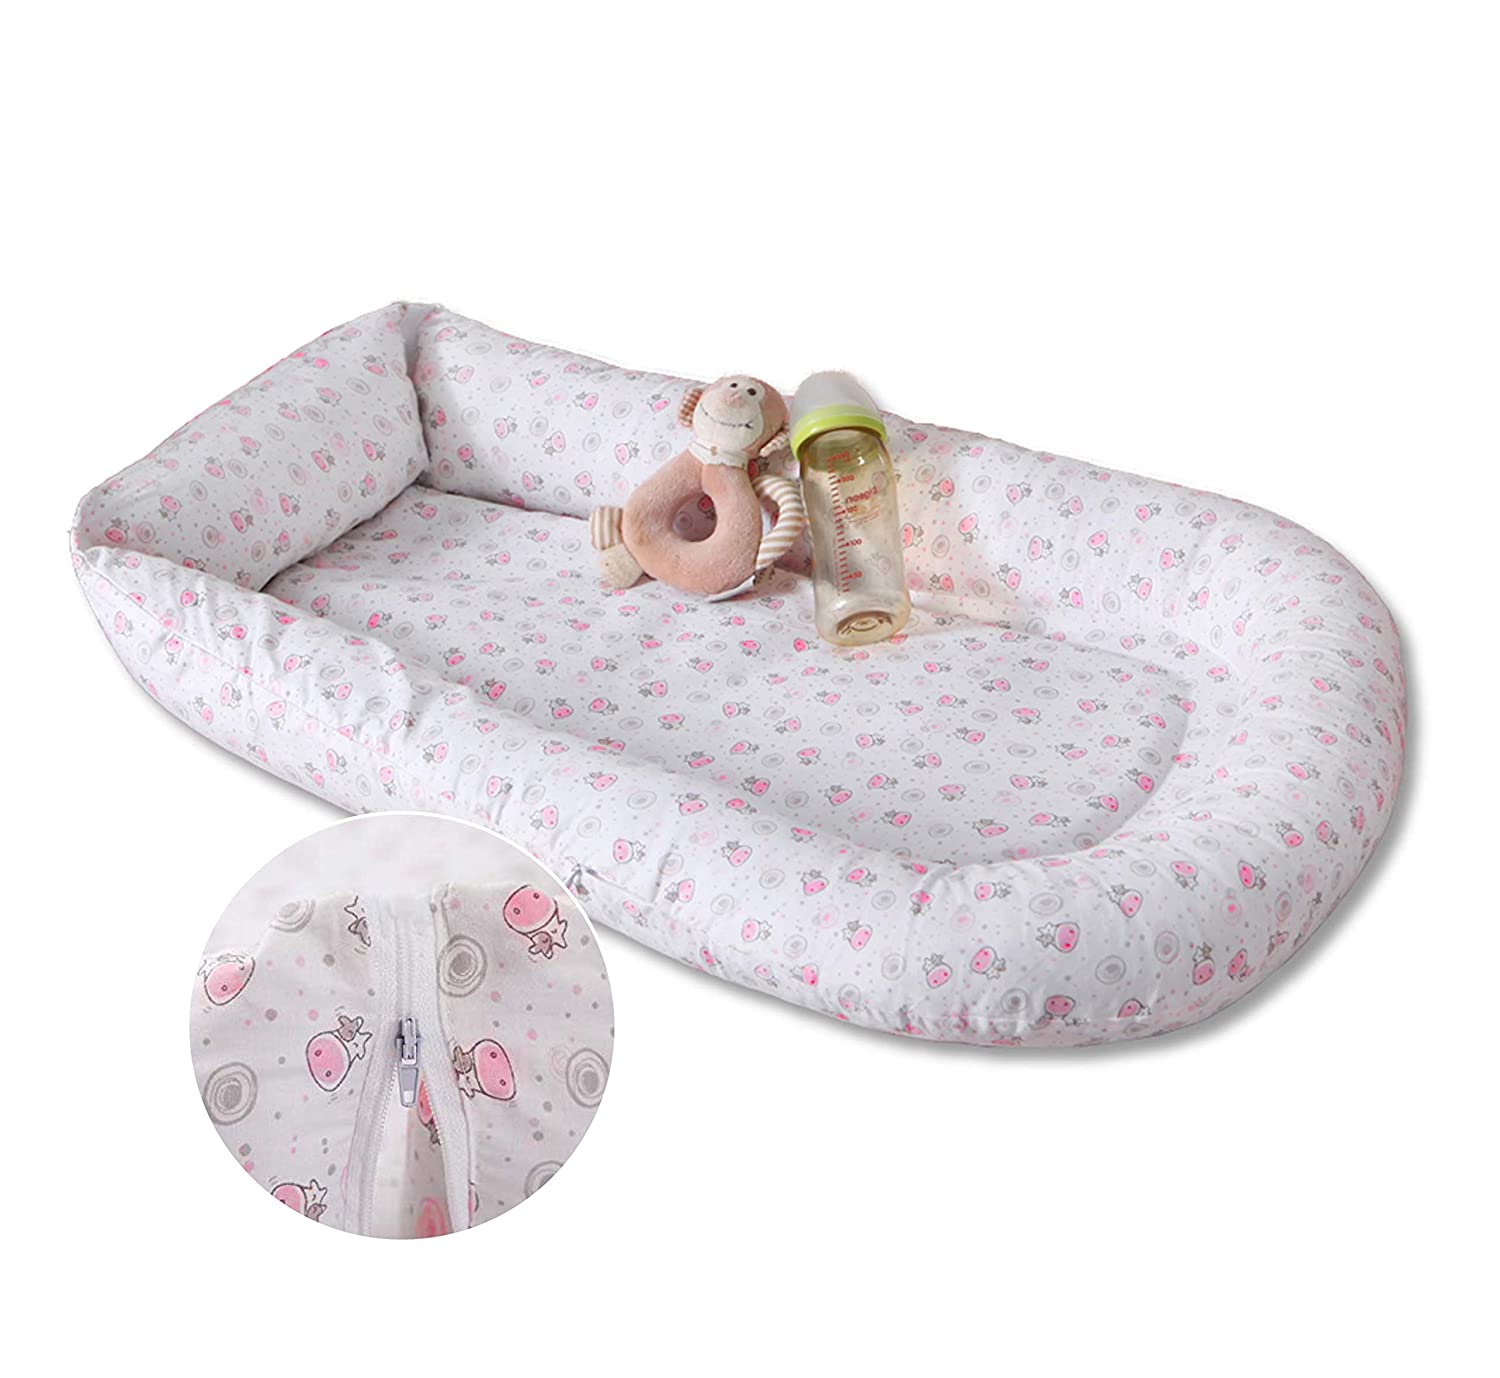 ZonLi Baby Lounger for Newborn, Baby Nest Cover for 0-12 Month, Portable  Nest Sleeper Cover for Infant with 100% Cotton Muslin Cover - Breathable